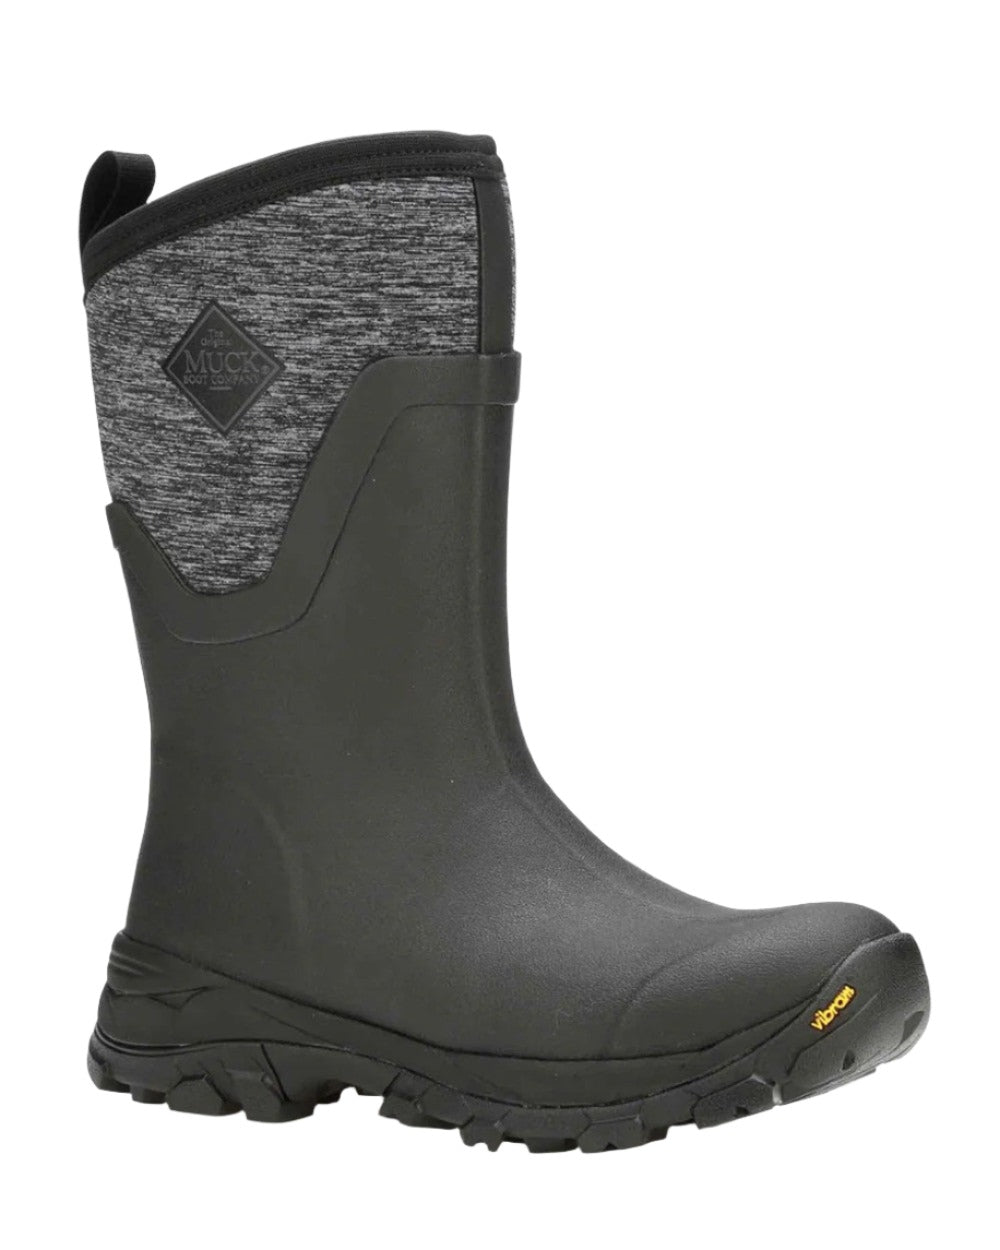 Black Heather Jersey Coloured Muck Boots Ladies Arctic Ice Mid Wellingtons Clearance Colours On A White Background 